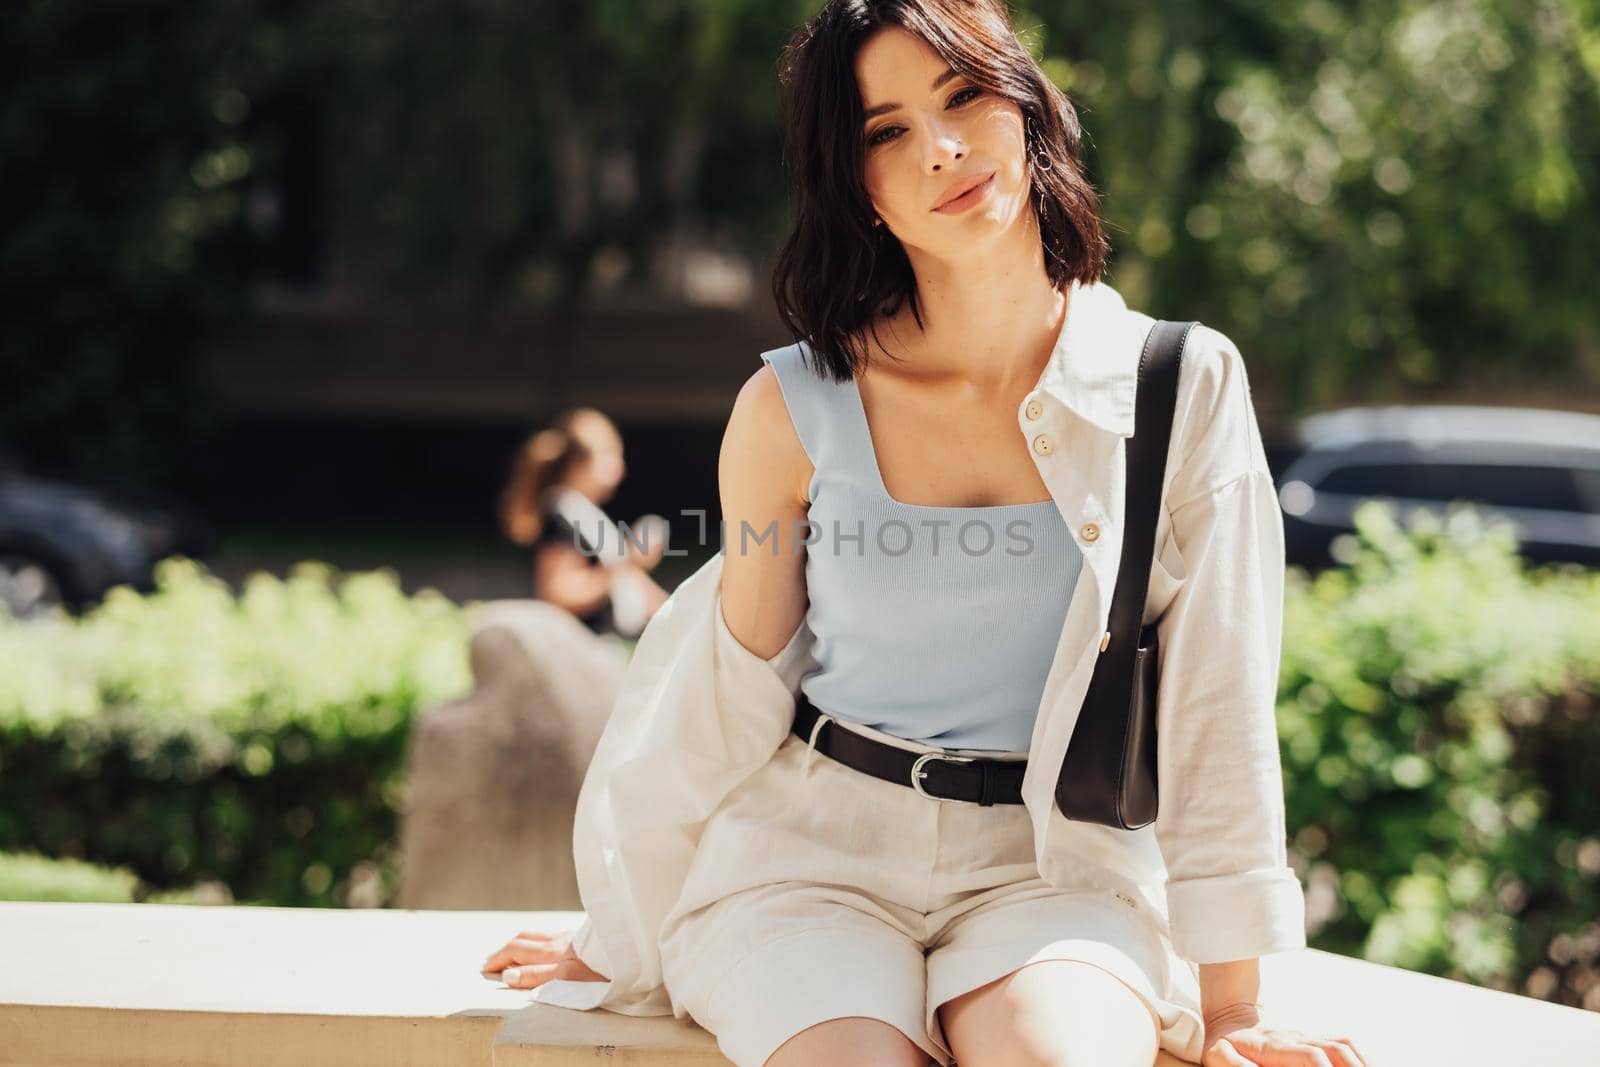 Portrait of Fashionable Young Brunette Woman Posing While Sitting on Handrail Outdoors